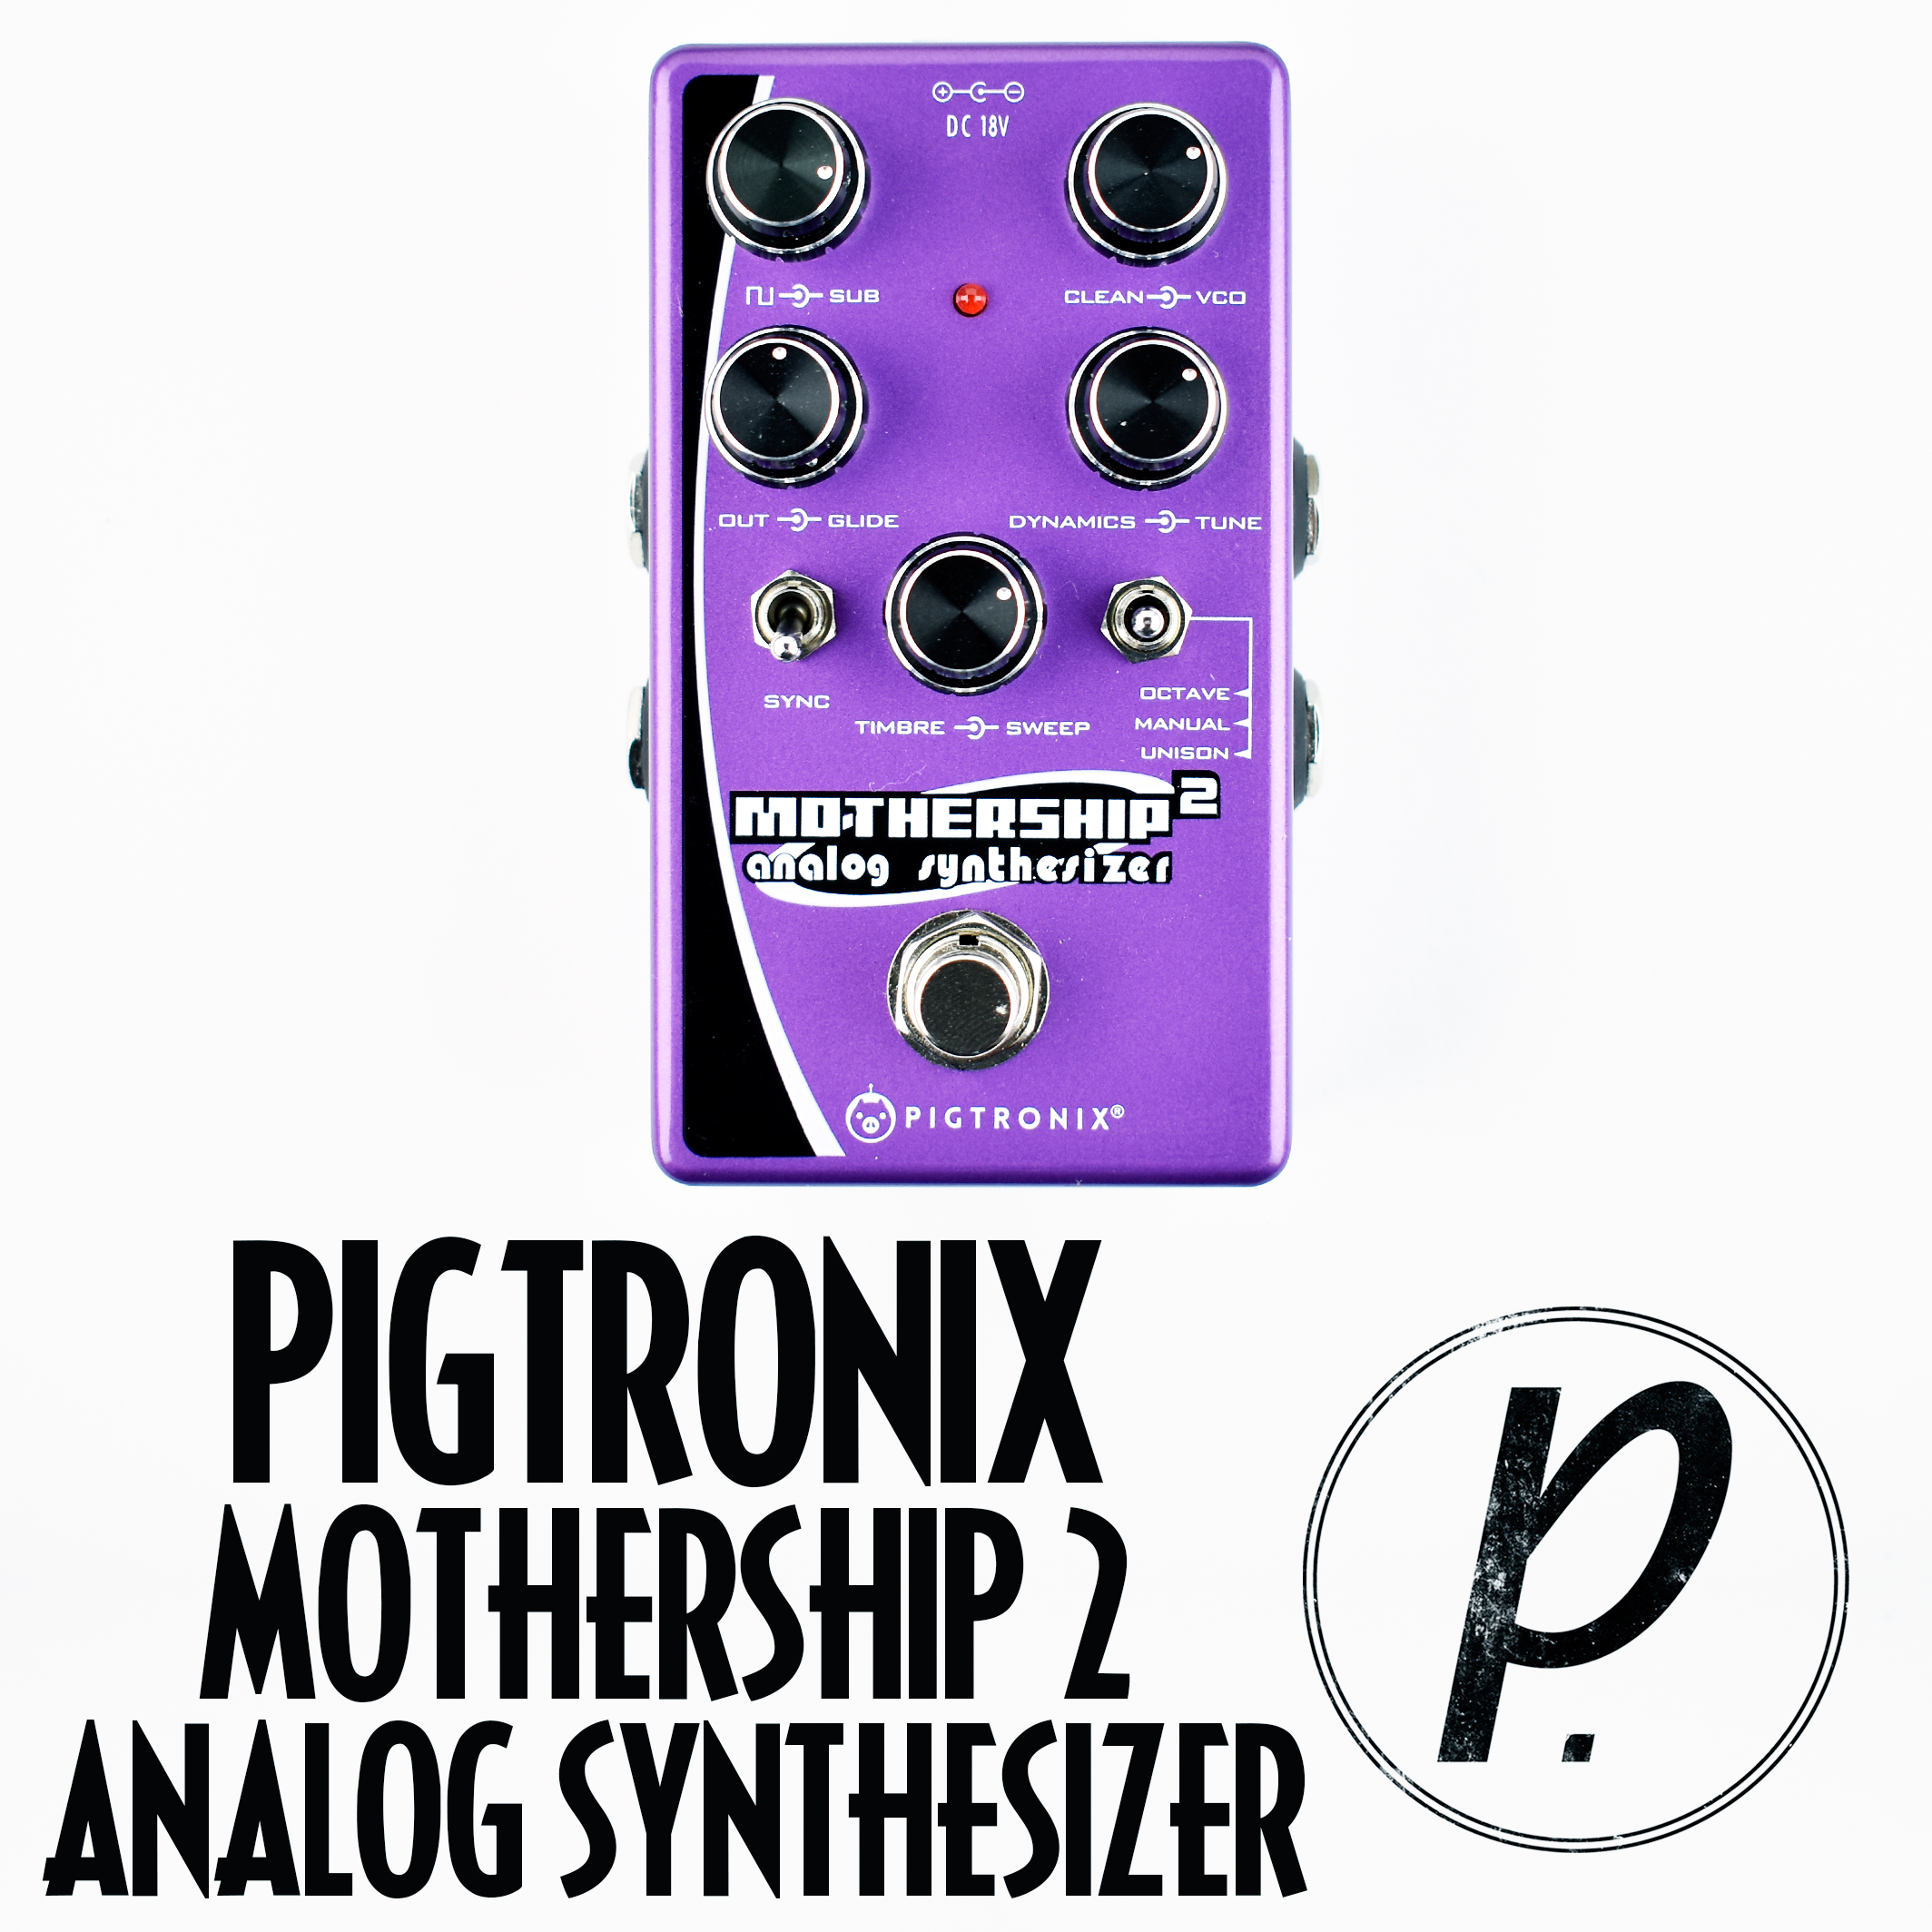 Pigtronix Mothership 2 Analog Synthesizer - Pedal of the Day